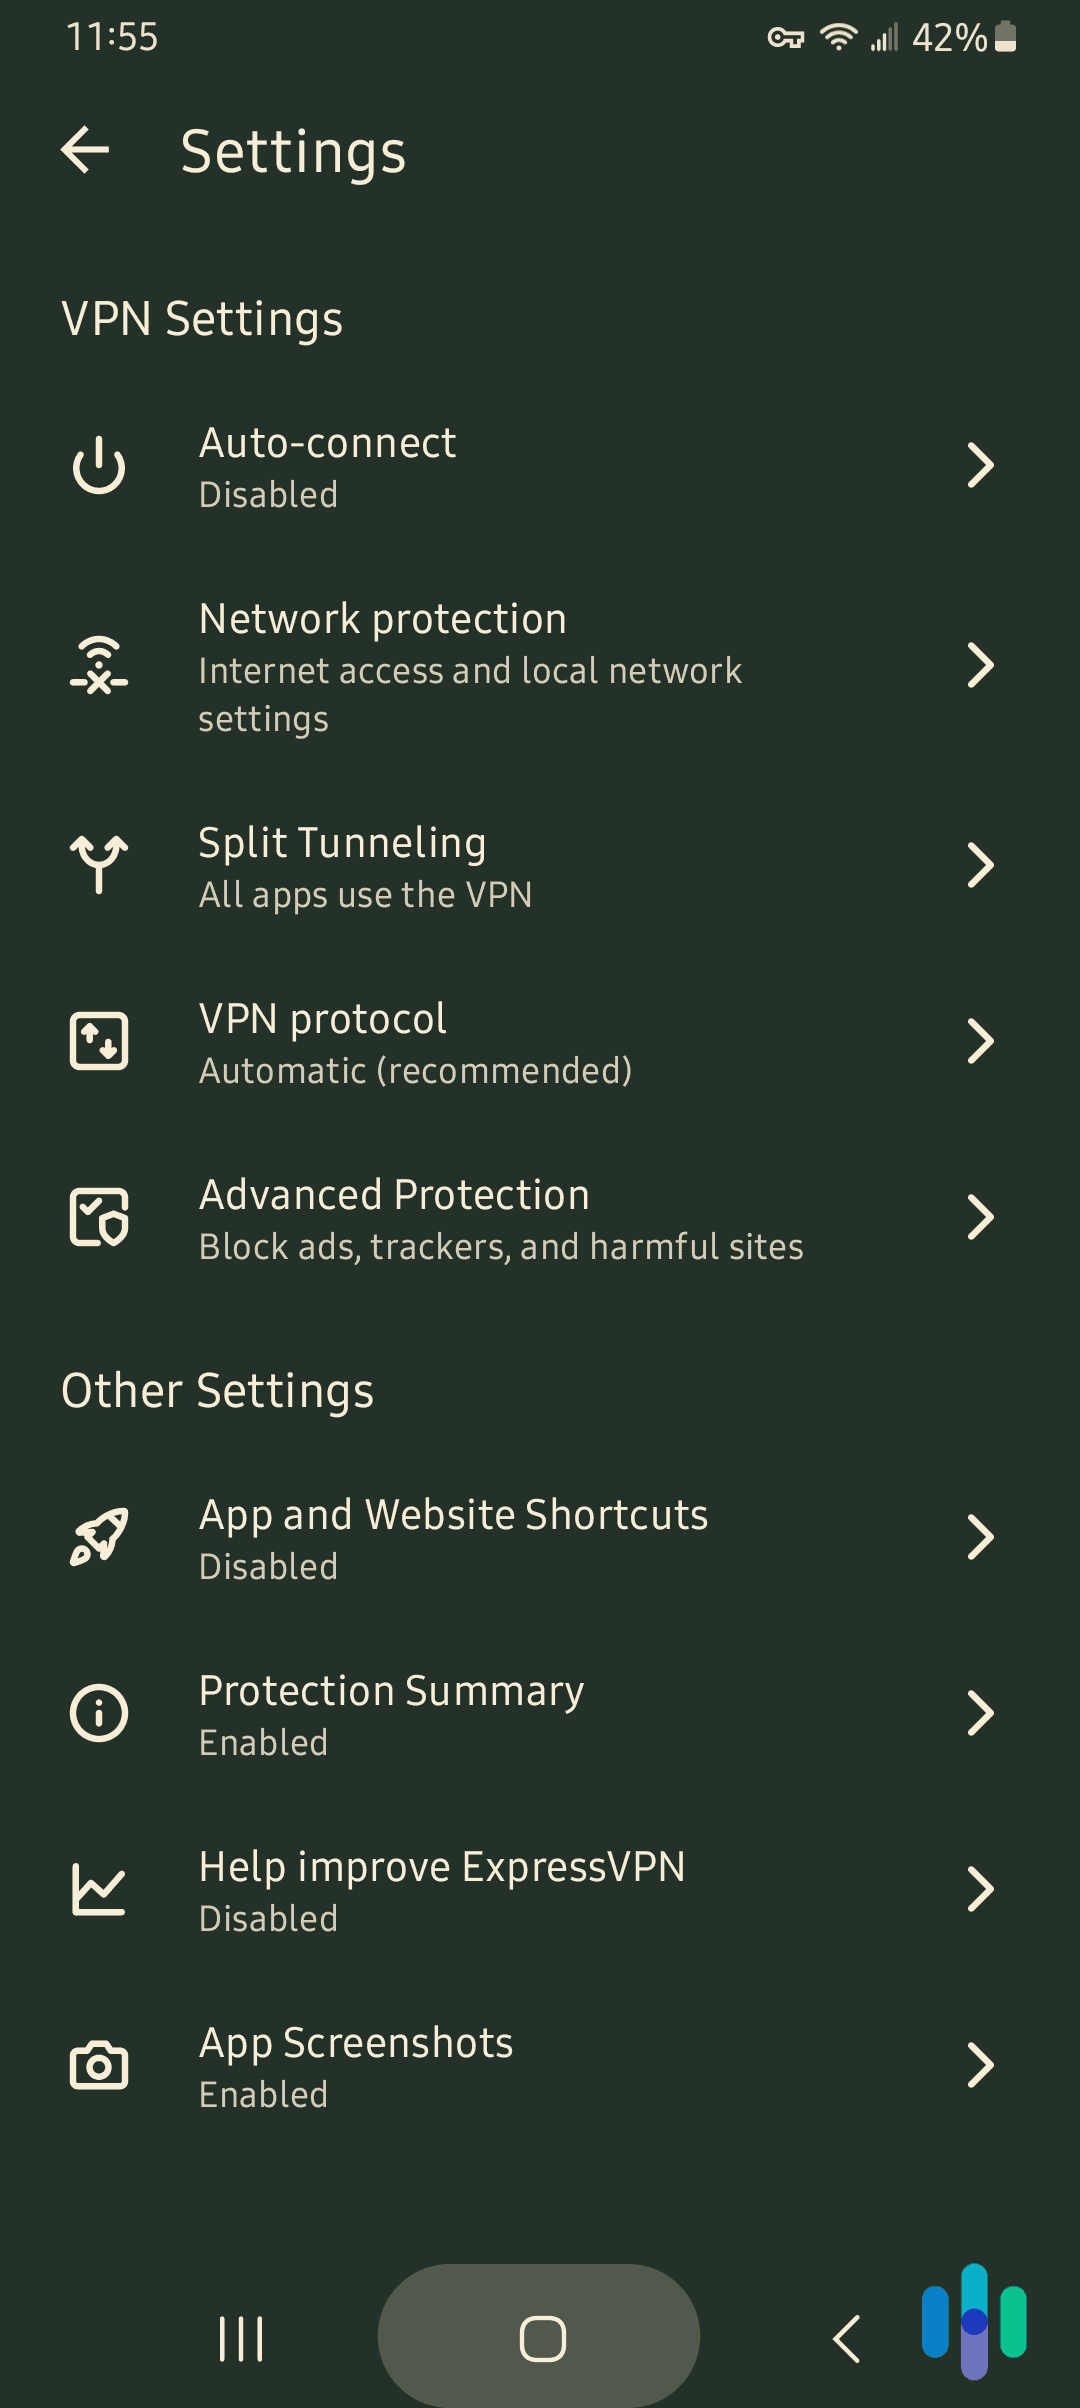 ExpressVPN's Security Settings on the Android App